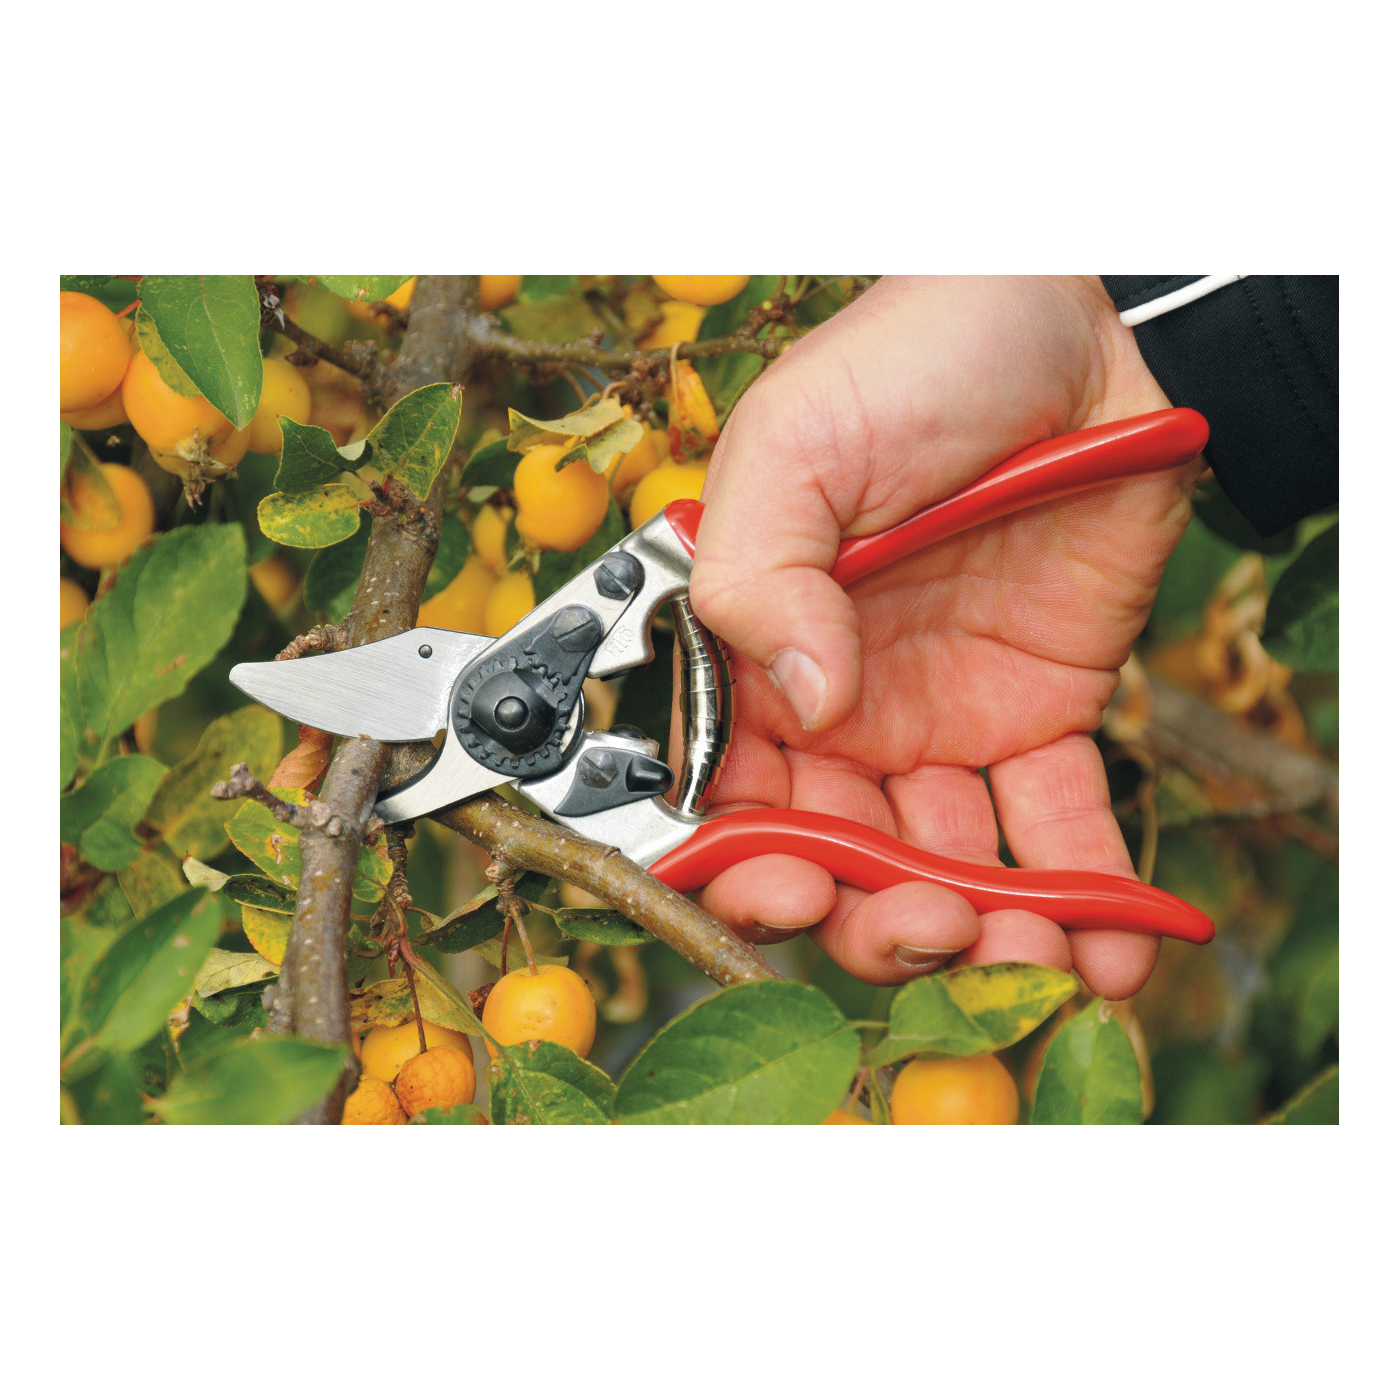 Felco F-6 Pruning Shear, 0.79 in Cutting Capacity, Steel Blade, Bypass Blade, Aluminum Handle - 3